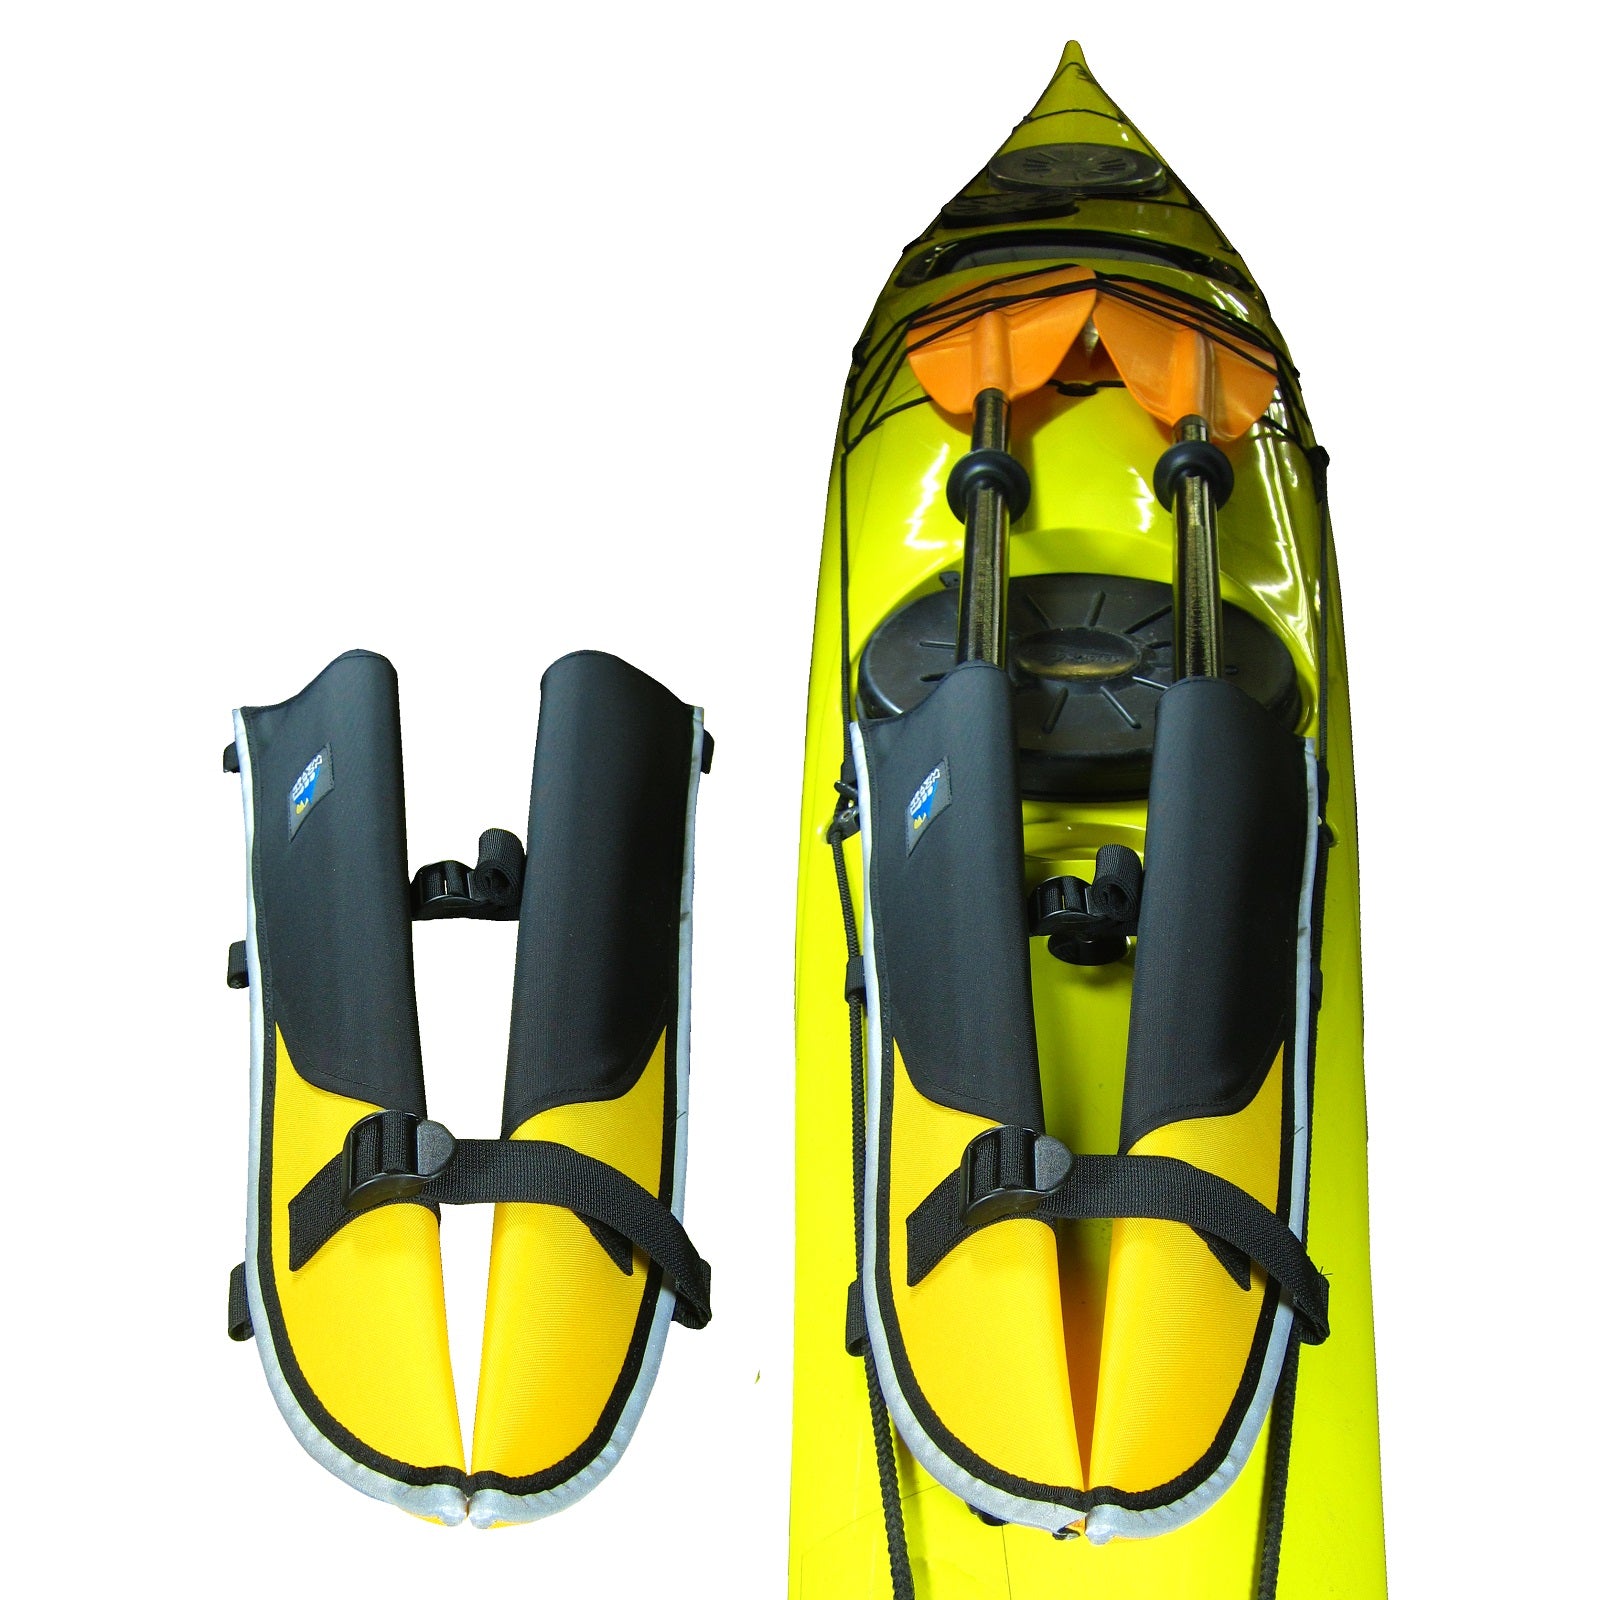 Paddle Scabbards - North Water